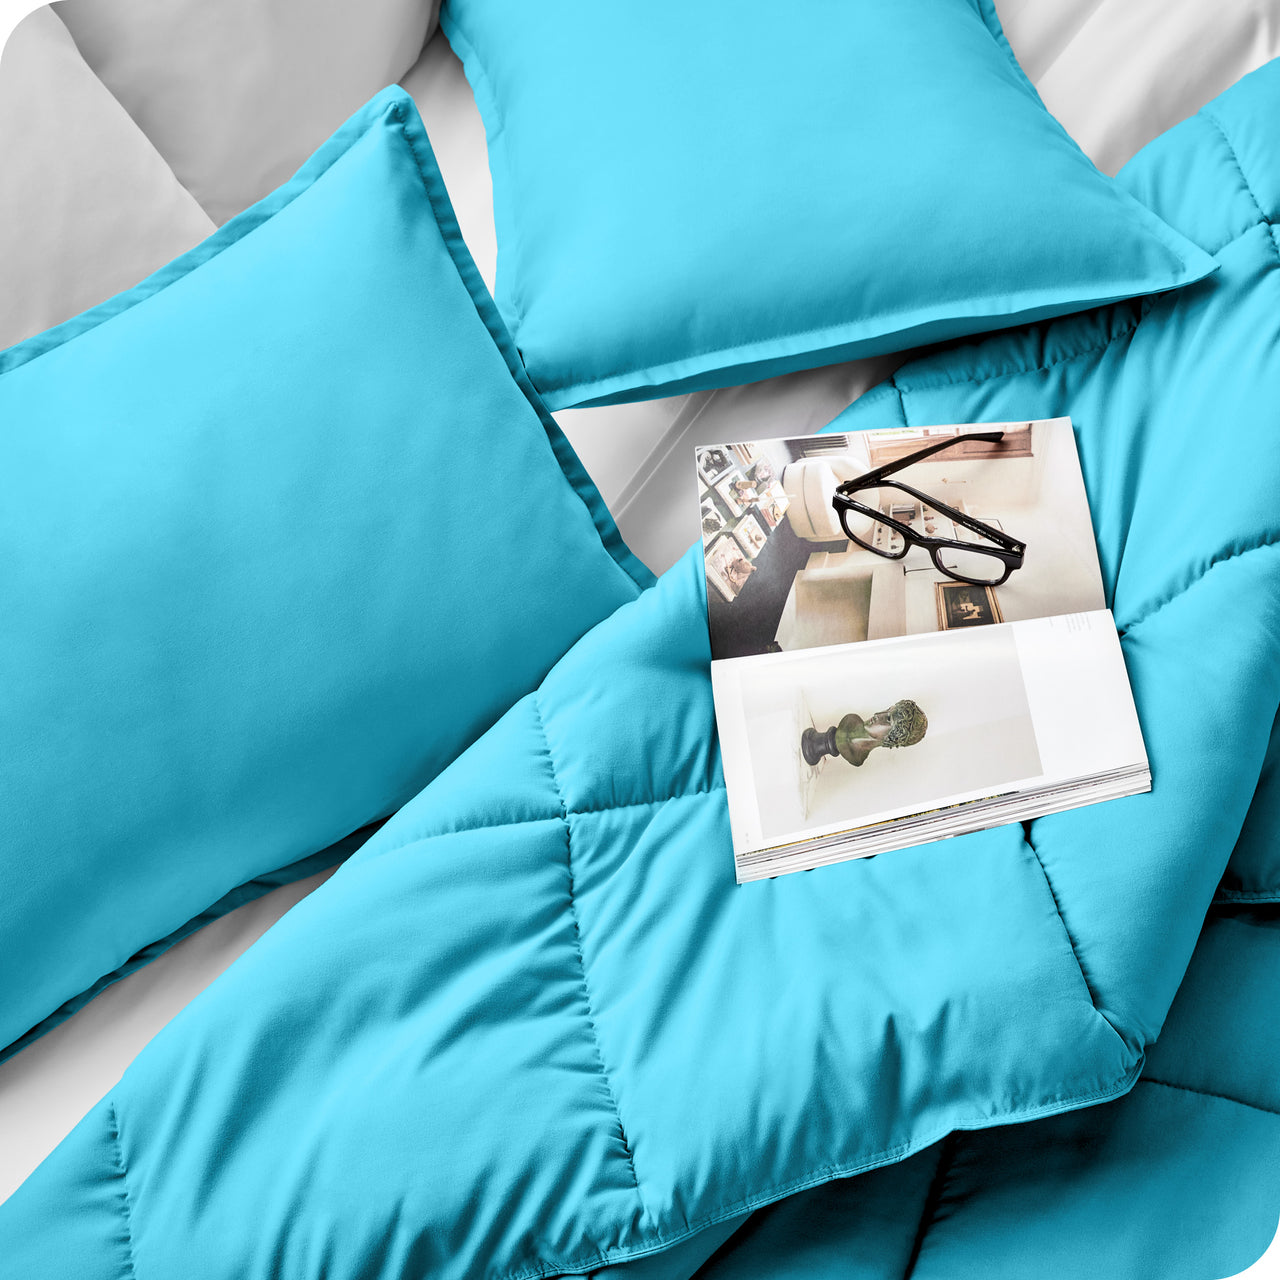 Gooselings Solid Twin Fitted Sheet - Aqua